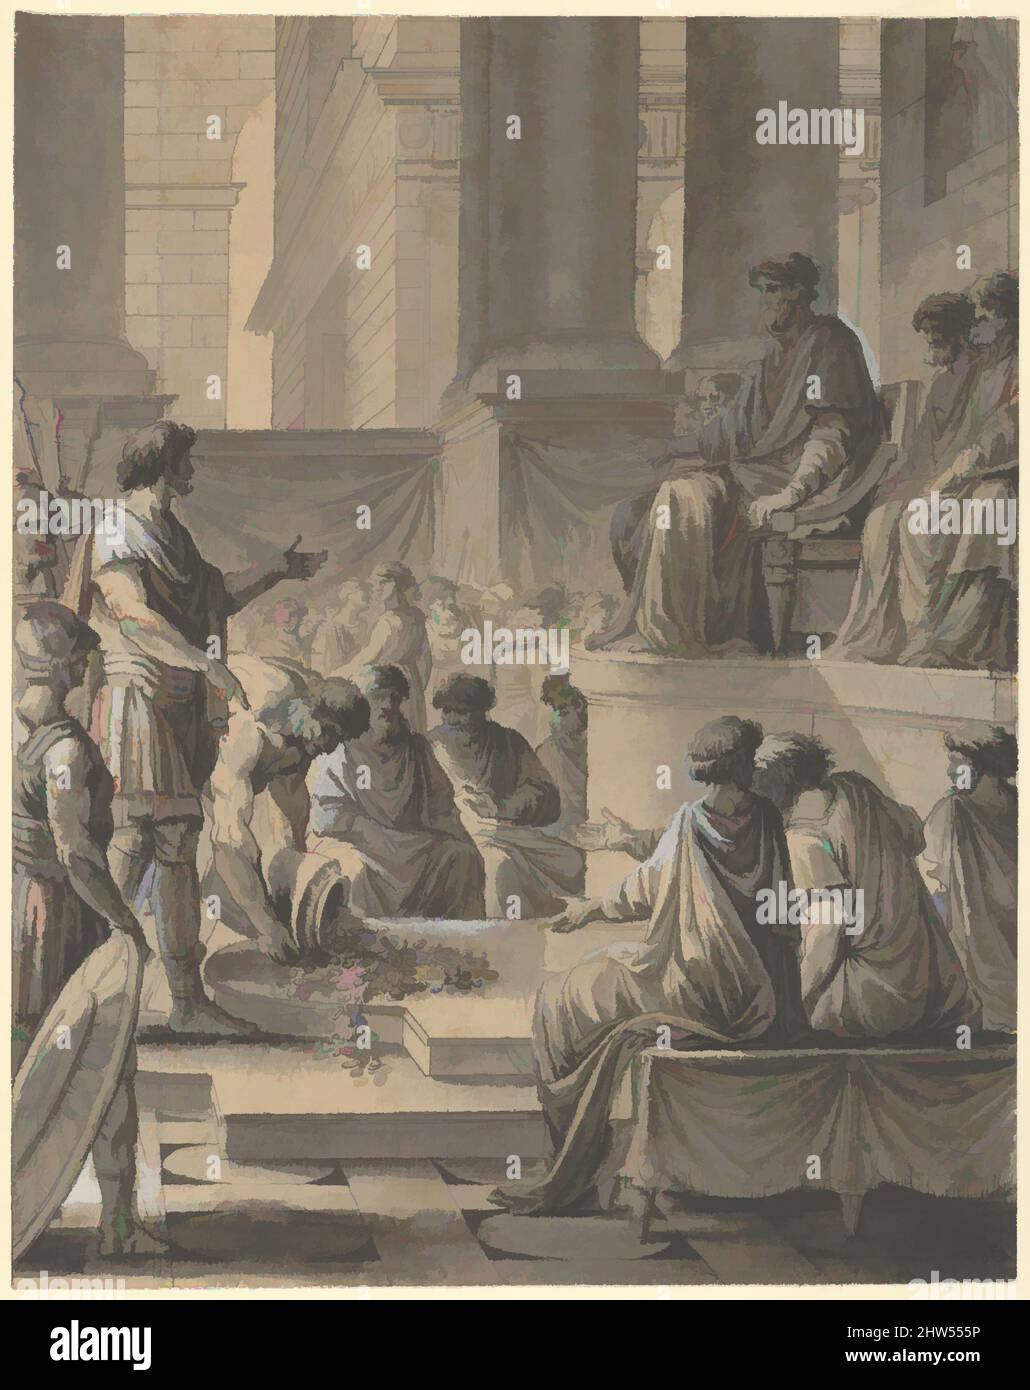 Art inspired by Hannibal Before the Senate in Carthage, 1798-99, Pen and black ink, gray wash, heightened with white; verso: point of brush and gray wash, 7 9/16 x 6 in. (19.2 x 15.3 cm), Drawings, Étienne Pierre Adrien Gois (French, Paris 1731–1823 Paris, Classic works modernized by Artotop with a splash of modernity. Shapes, color and value, eye-catching visual impact on art. Emotions through freedom of artworks in a contemporary way. A timeless message pursuing a wildly creative new direction. Artists turning to the digital medium and creating the Artotop NFT Stock Photo